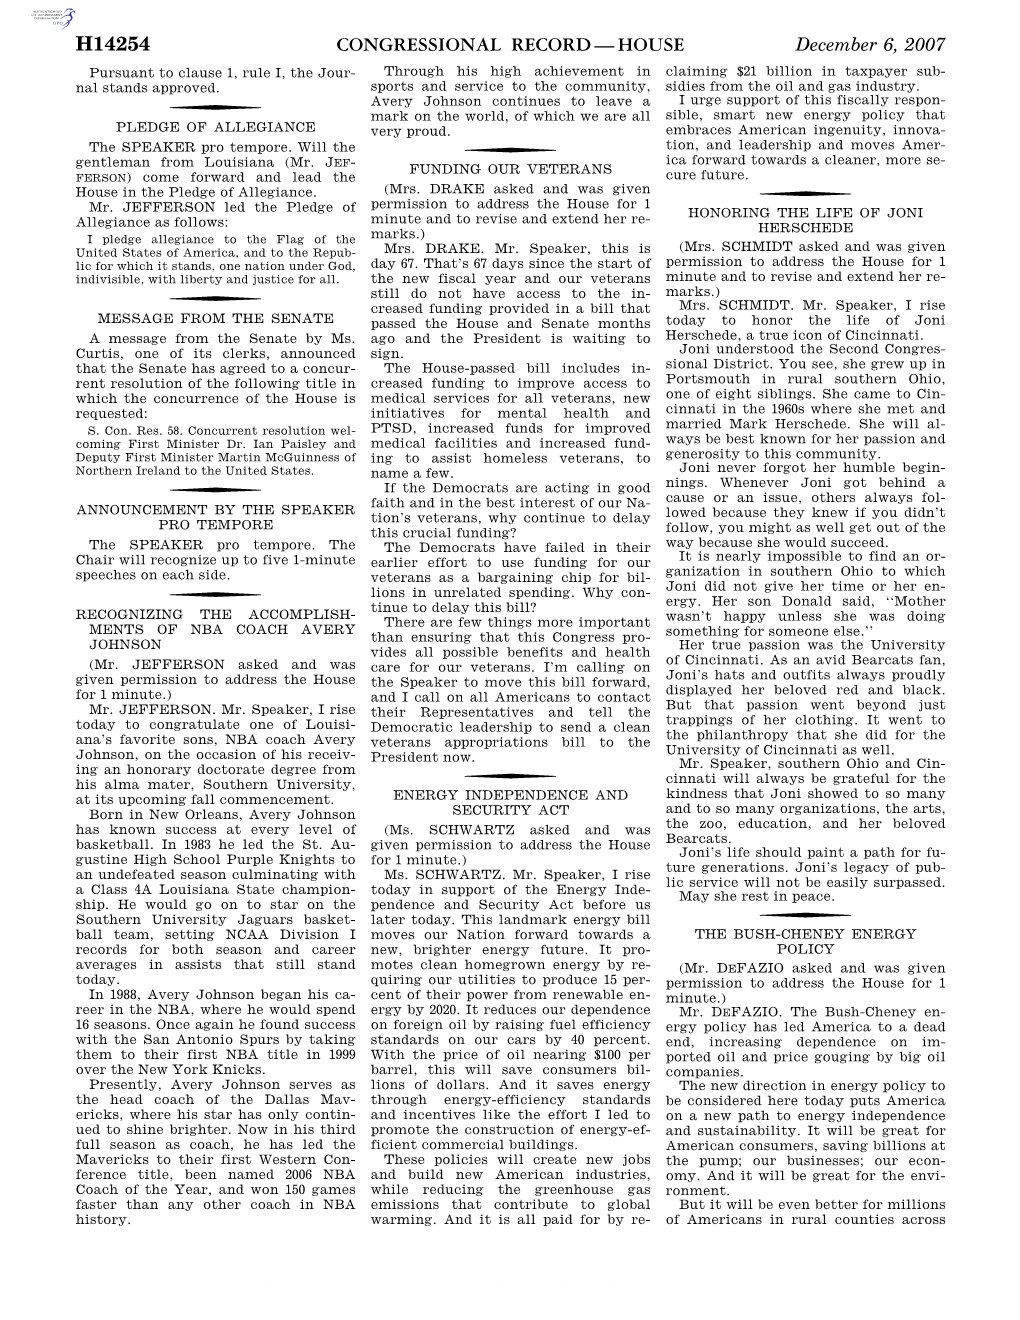 Congressional Record—House H14254